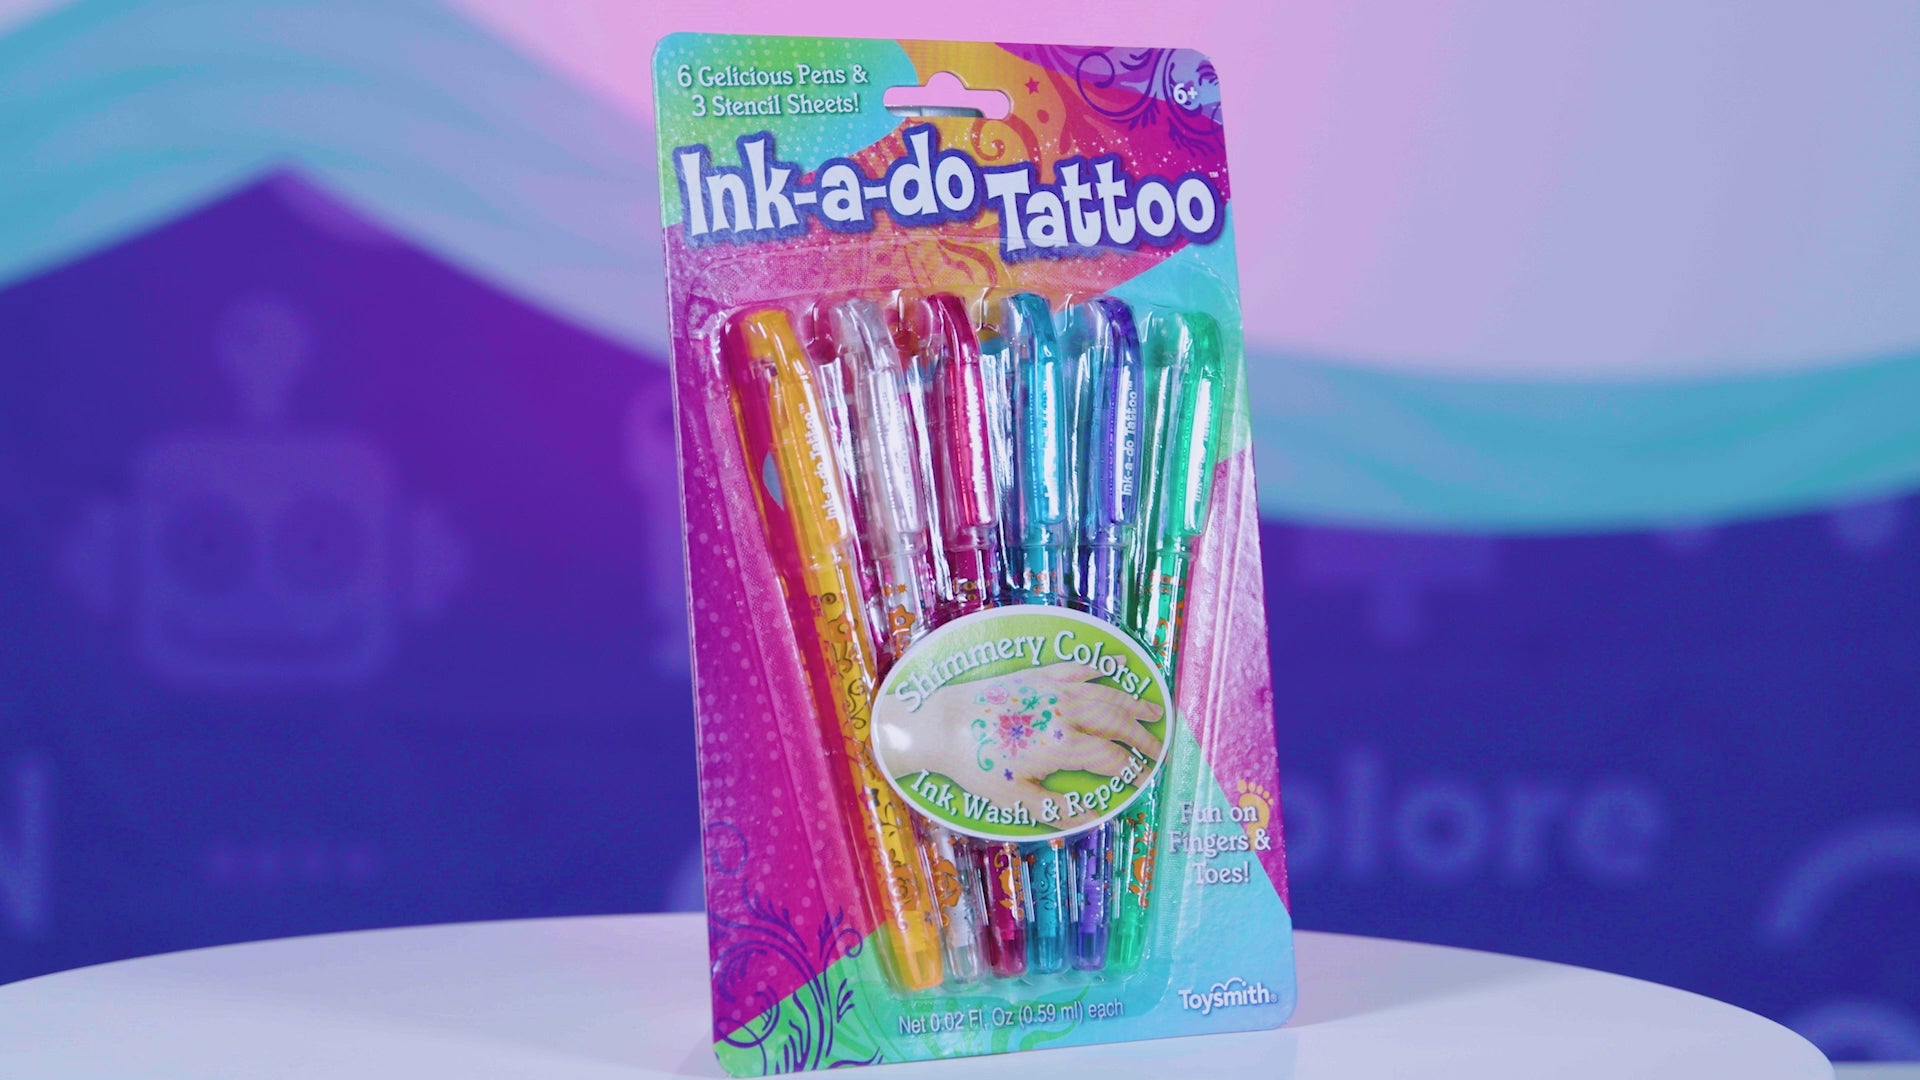 A video showing Ink-a-do tattoo pens in use